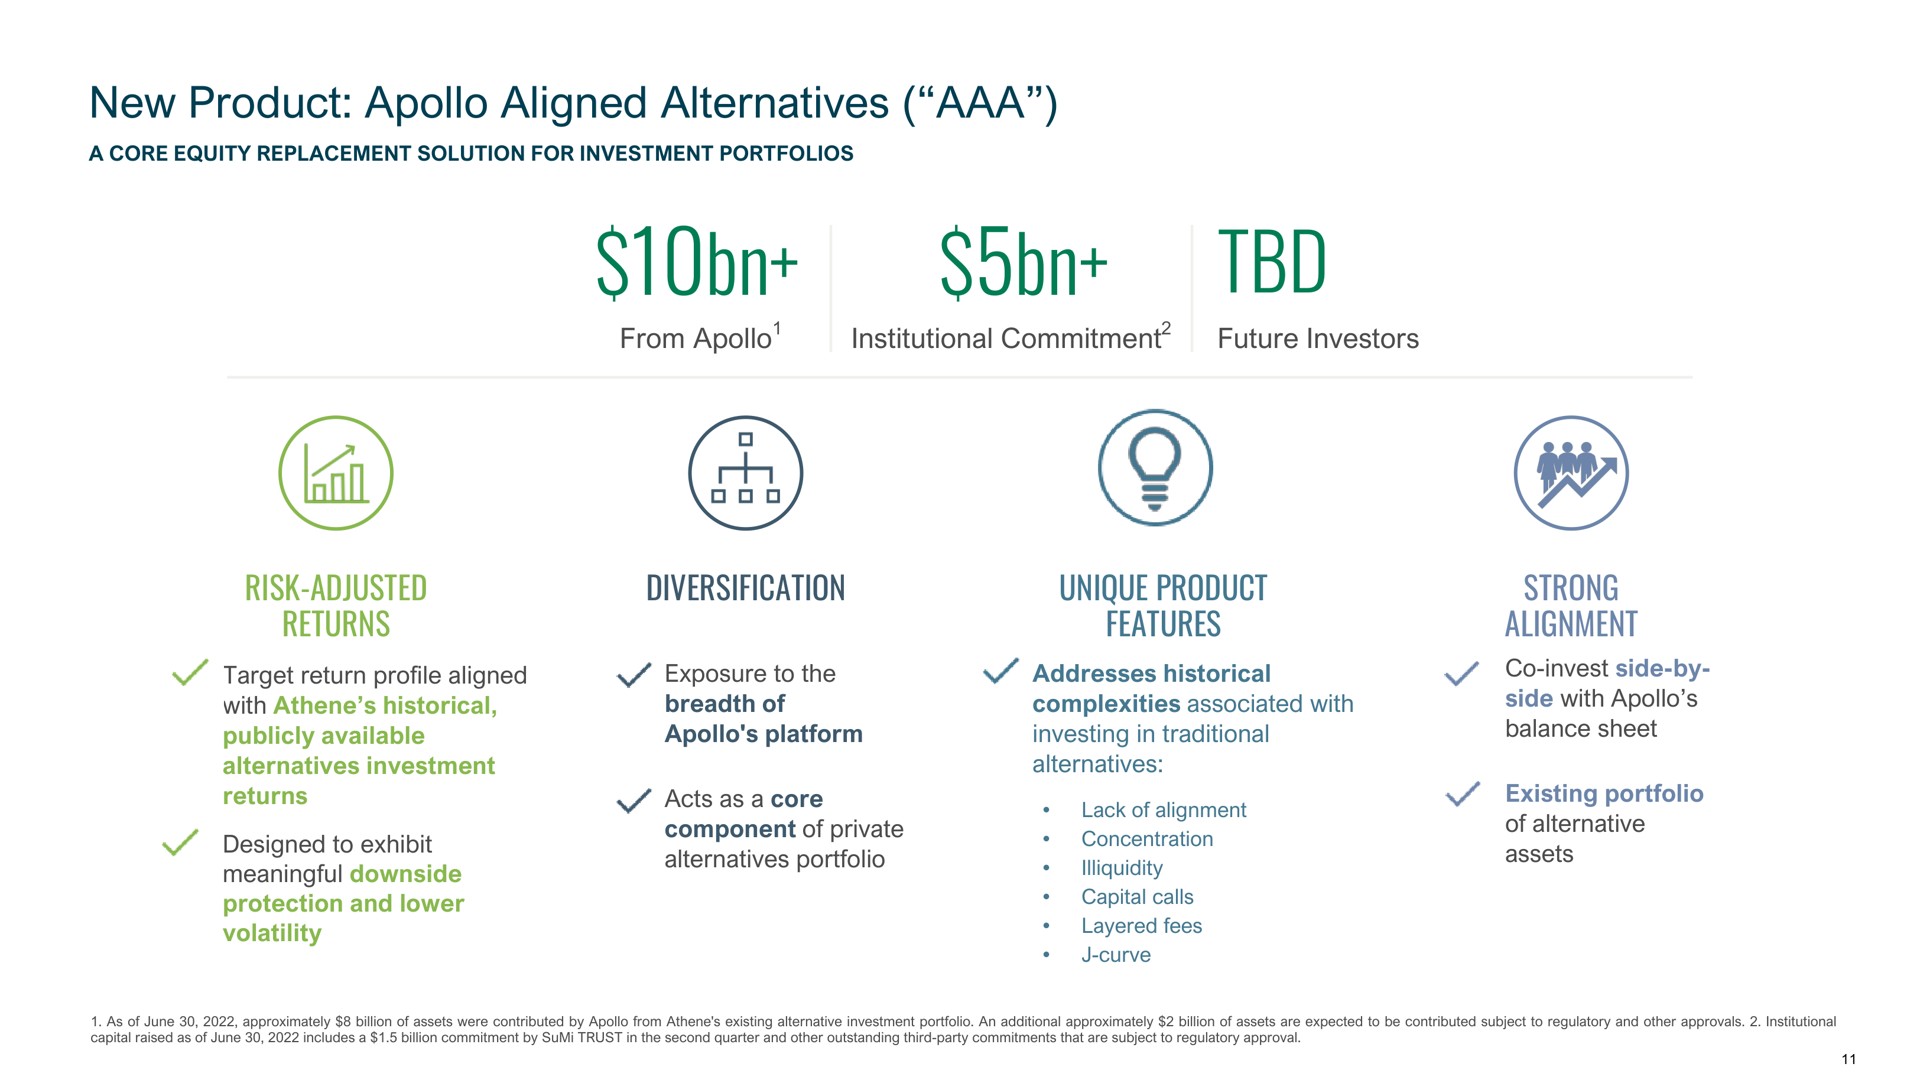 new product aligned alternatives from institutional commitment future investors risk adjusted returns diversification unique product features strong alignment breadth of platform with historical publicly available designed to exhibit complexities associated with investing in traditional side with balance sheet | Apollo Global Management